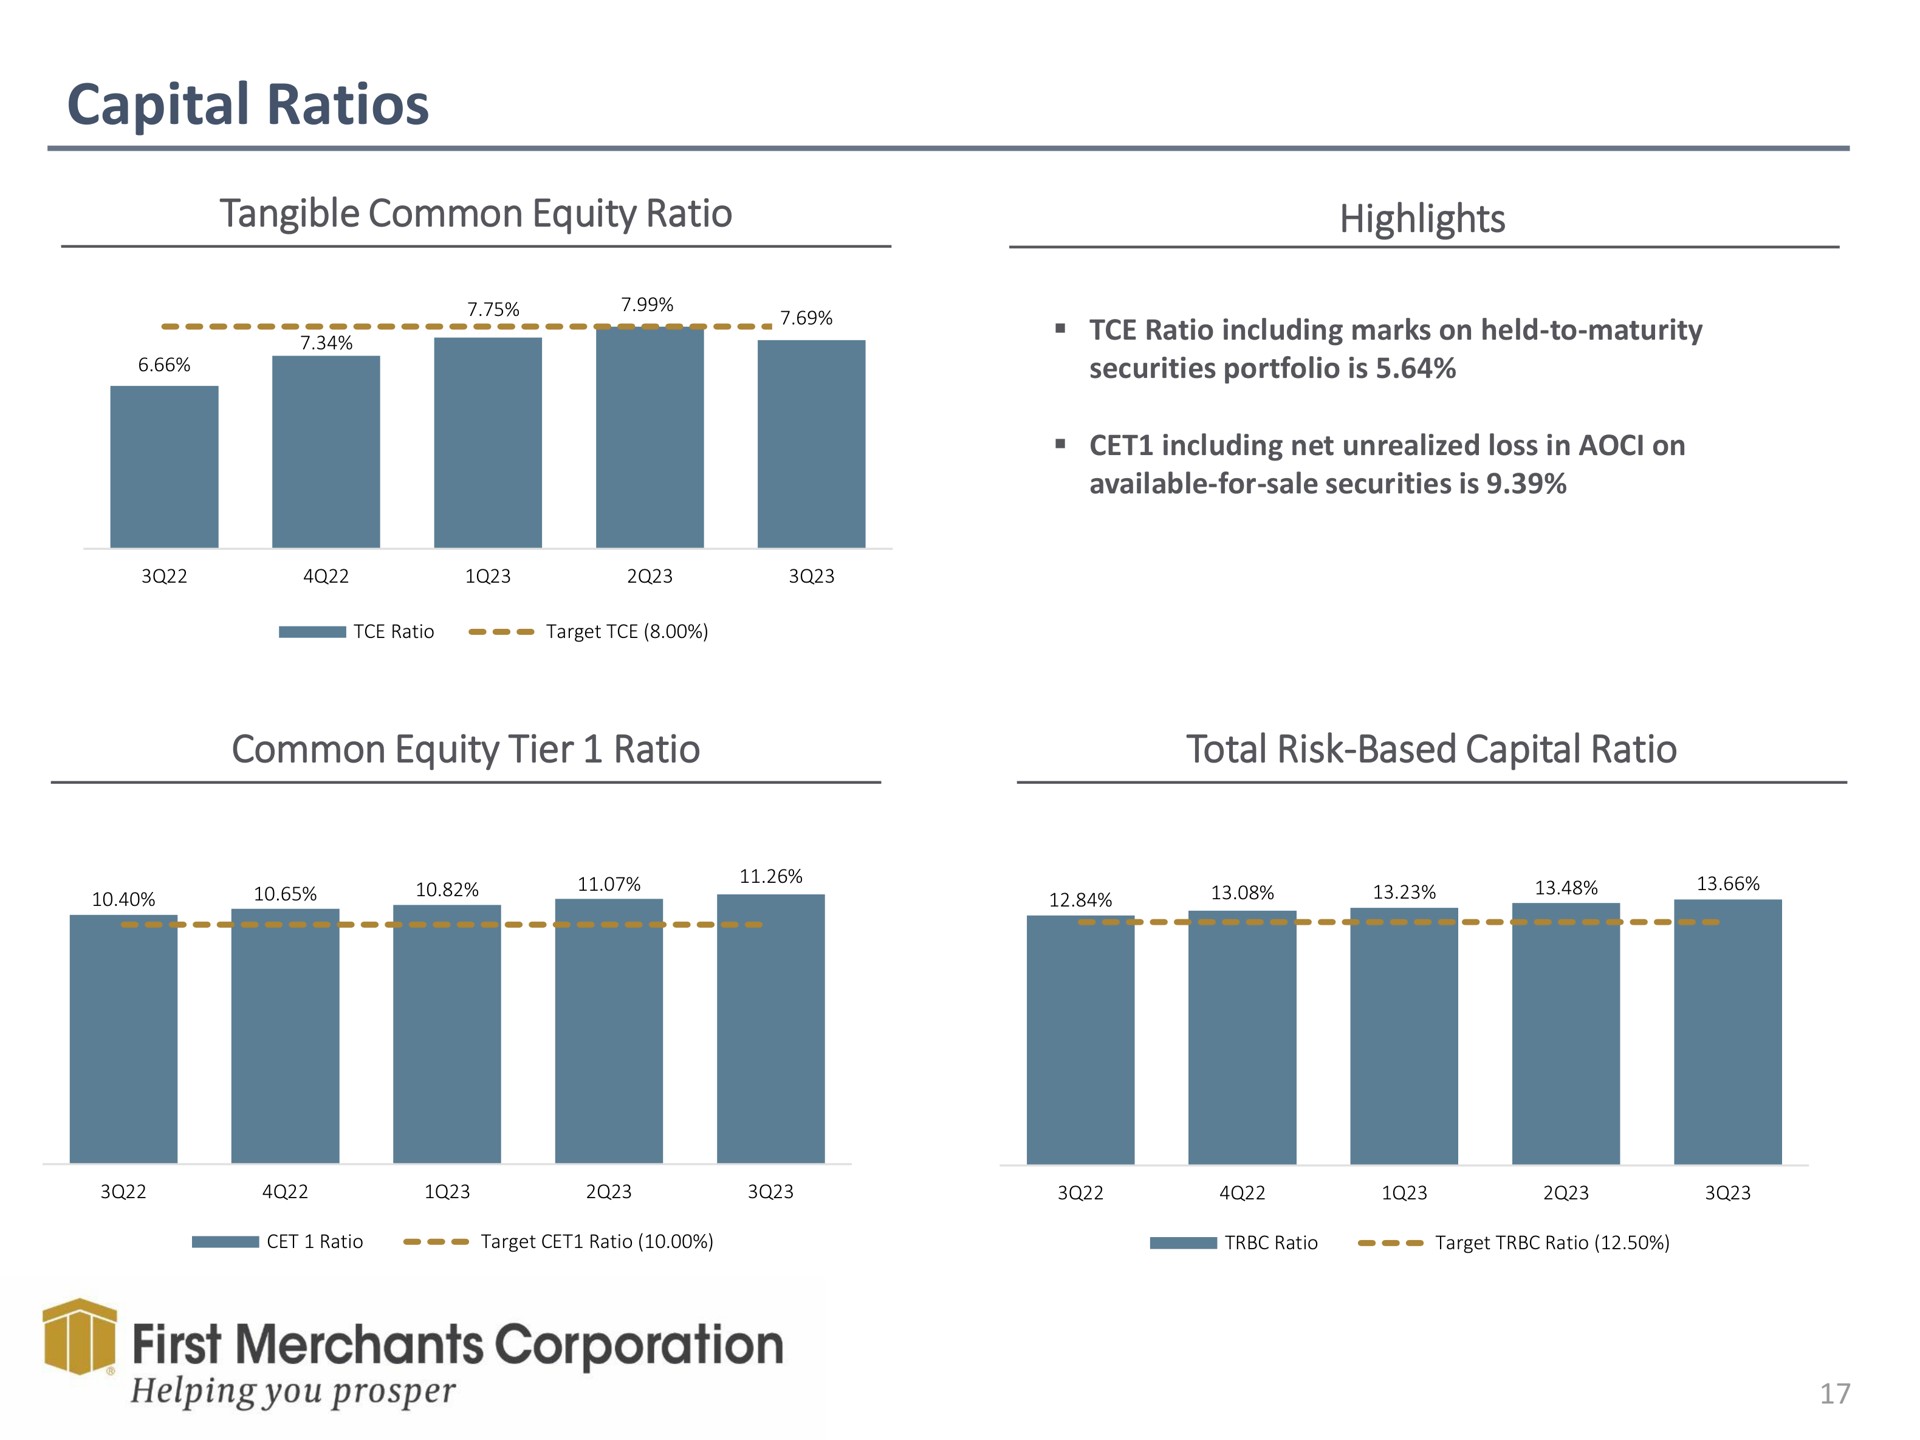 capital ratios tangible common equity ratio highlights common equity tier ratio total risk based capital ratio first merchants corporation helping you prosper | First Merchants